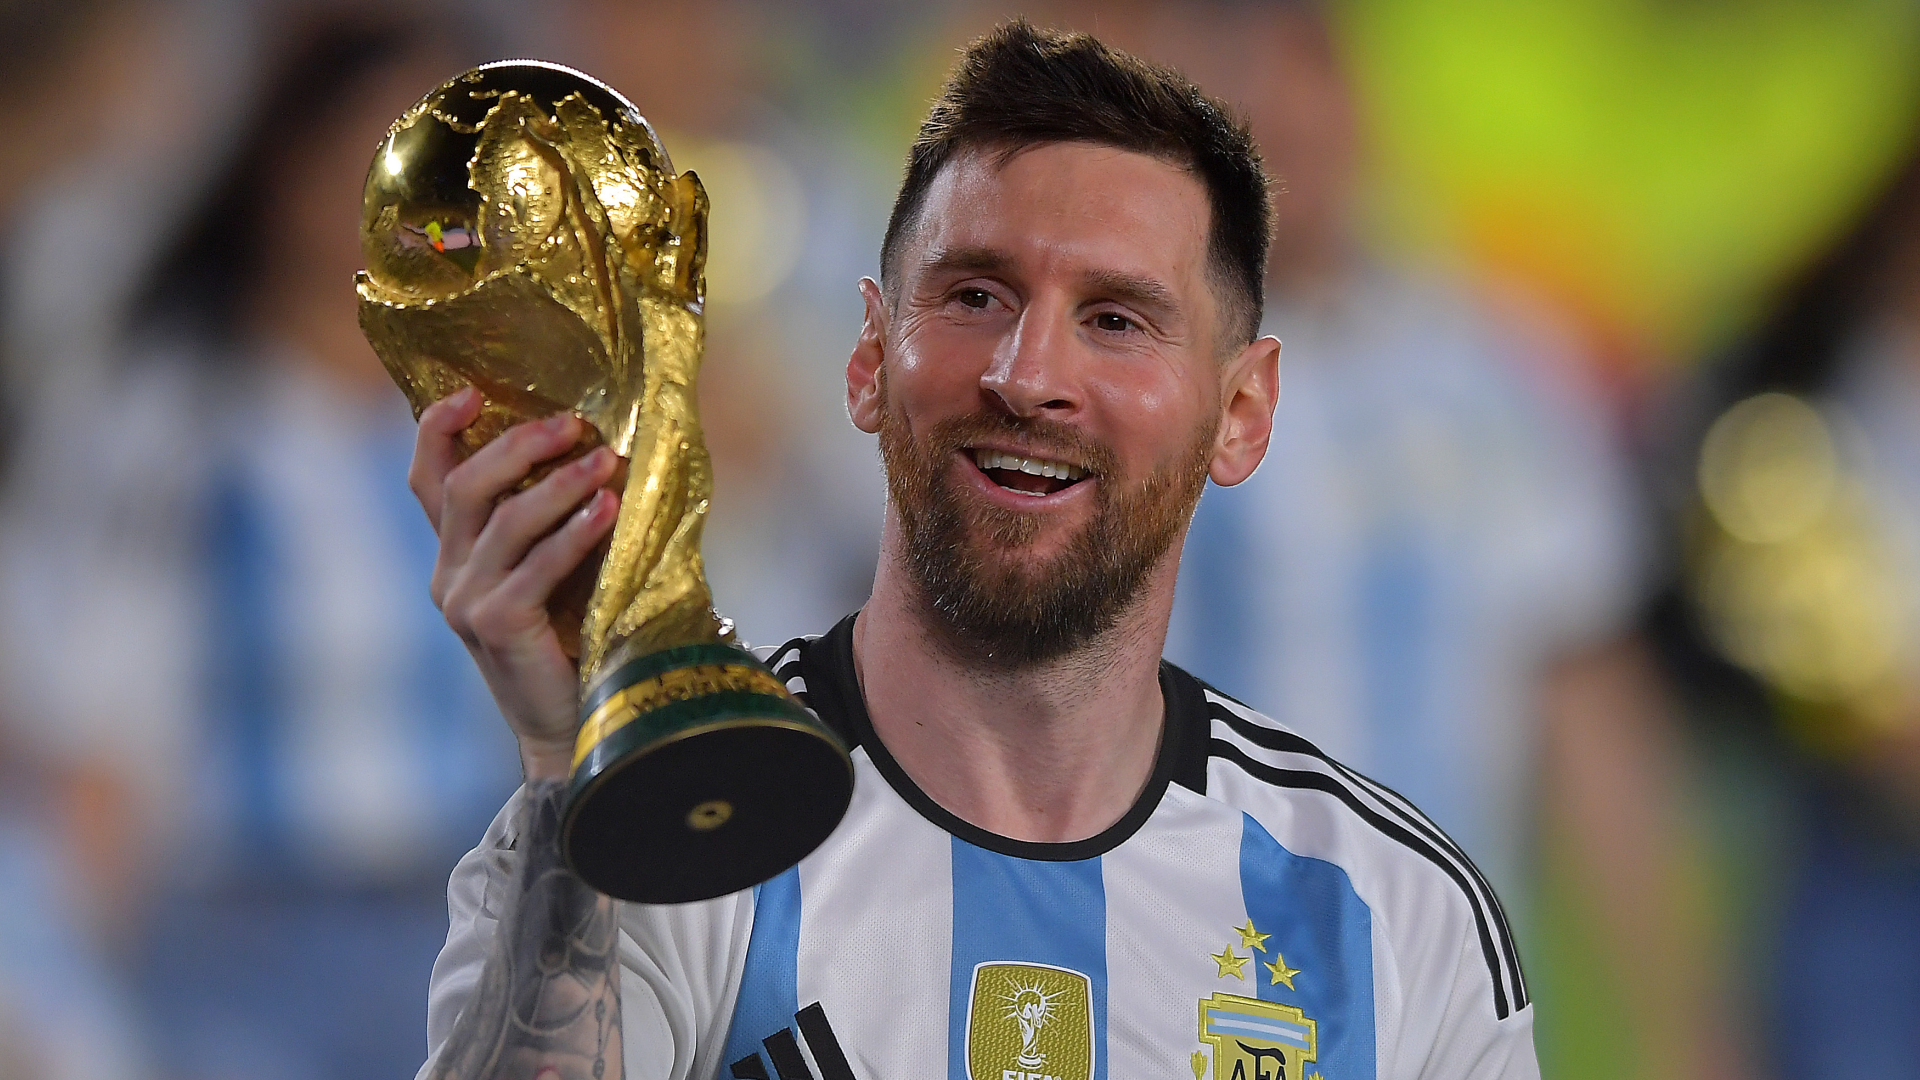 'They said a lot of bad things about me' - Lionel Messi opens up on his 'bad time' in Argentina before silencing his critics by winning the World Cup